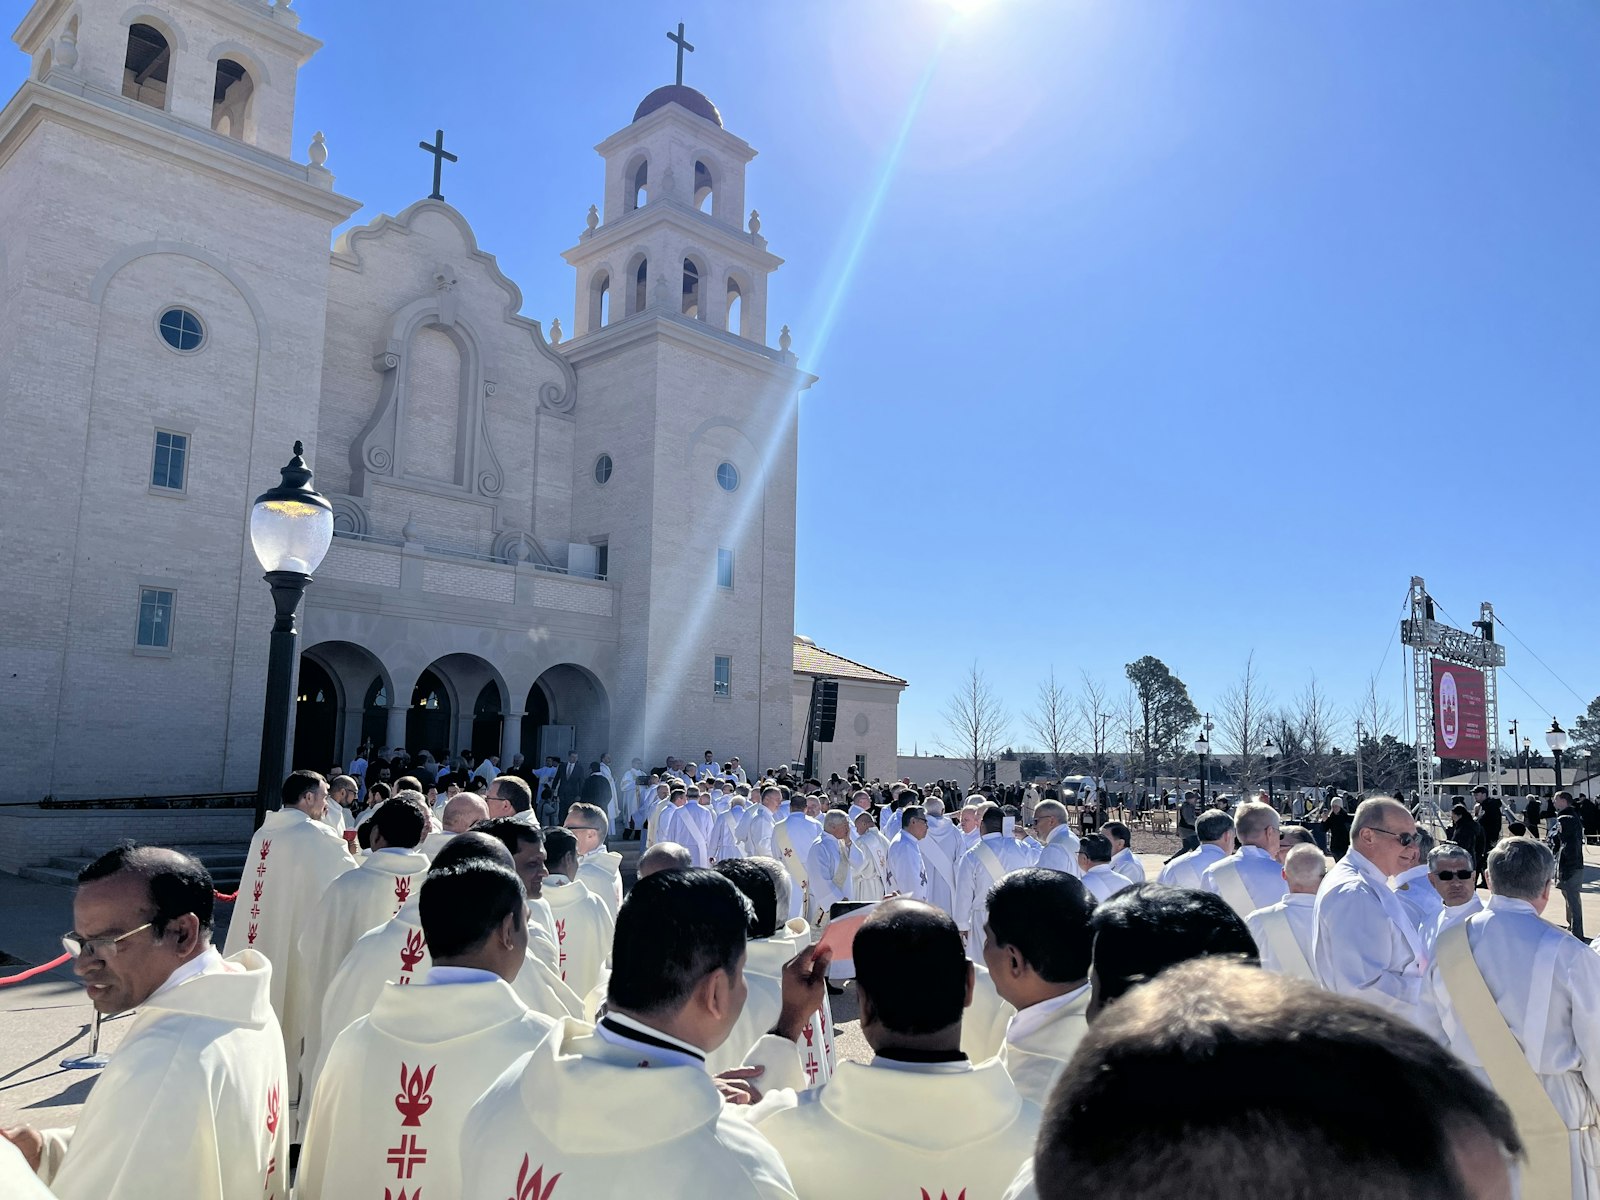 Priests, bishops and clergy process out of the newly dedicated Blessed Stanley Rother Shrine in Oklahoma City on Feb. 17. Fr. Zaid Chabaan, a priest of the Archdiocese of Detroit, attended the dedication and met members of the Rother family. (Courtesy of Fr. Zaid Chabaan)